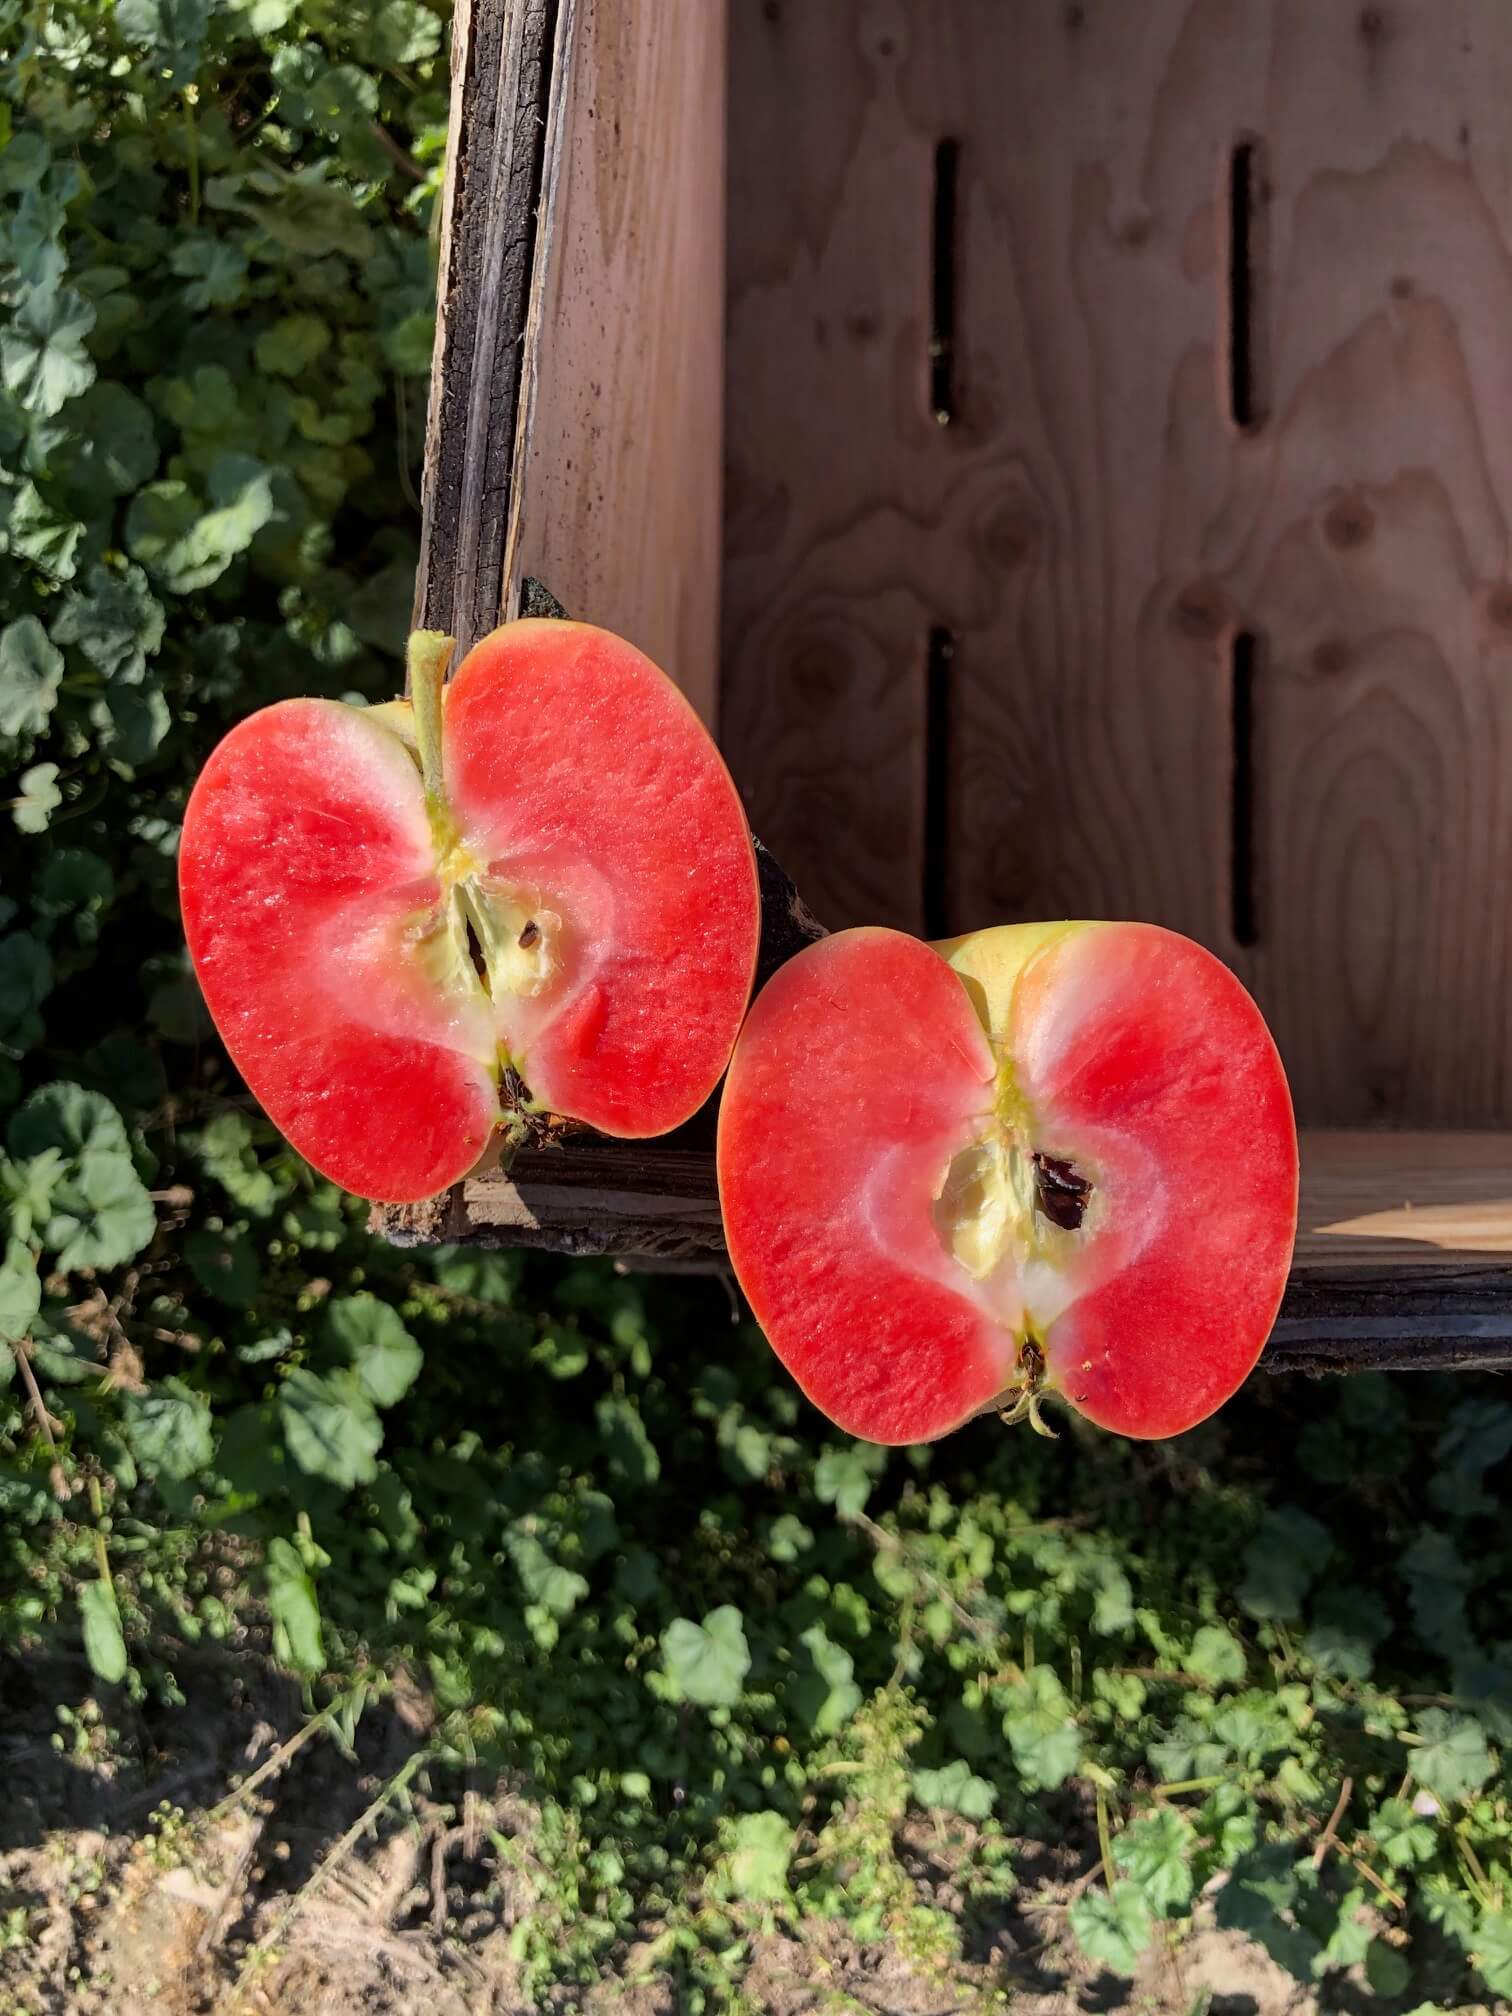 A new branded apple sliced in half with red 